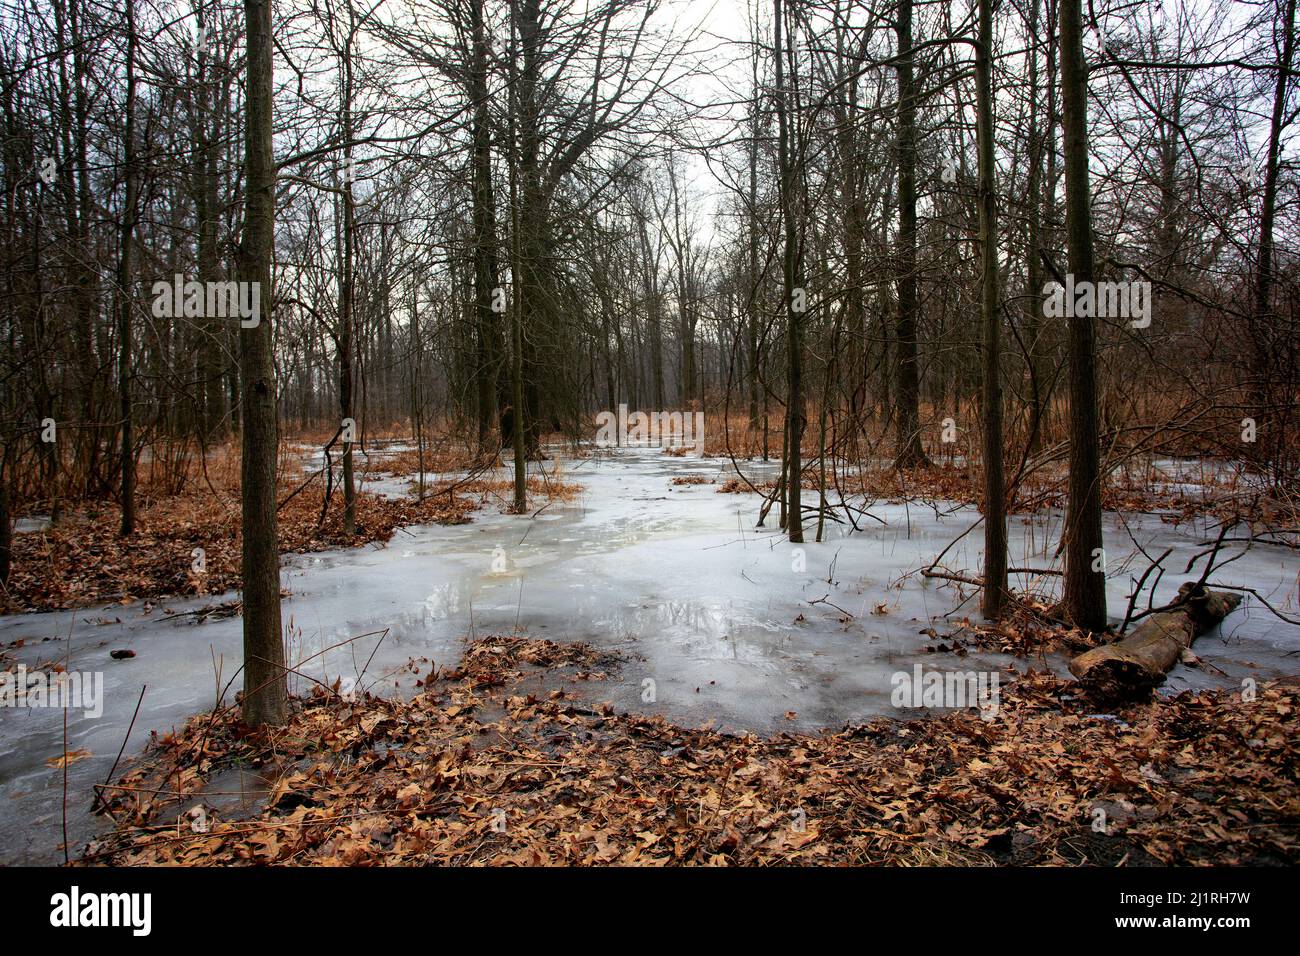 Frozen Pond in the Woods with Trees and Fallen Leaves at Ojibway Park in Windsor, Ontario Canada Stock Photo